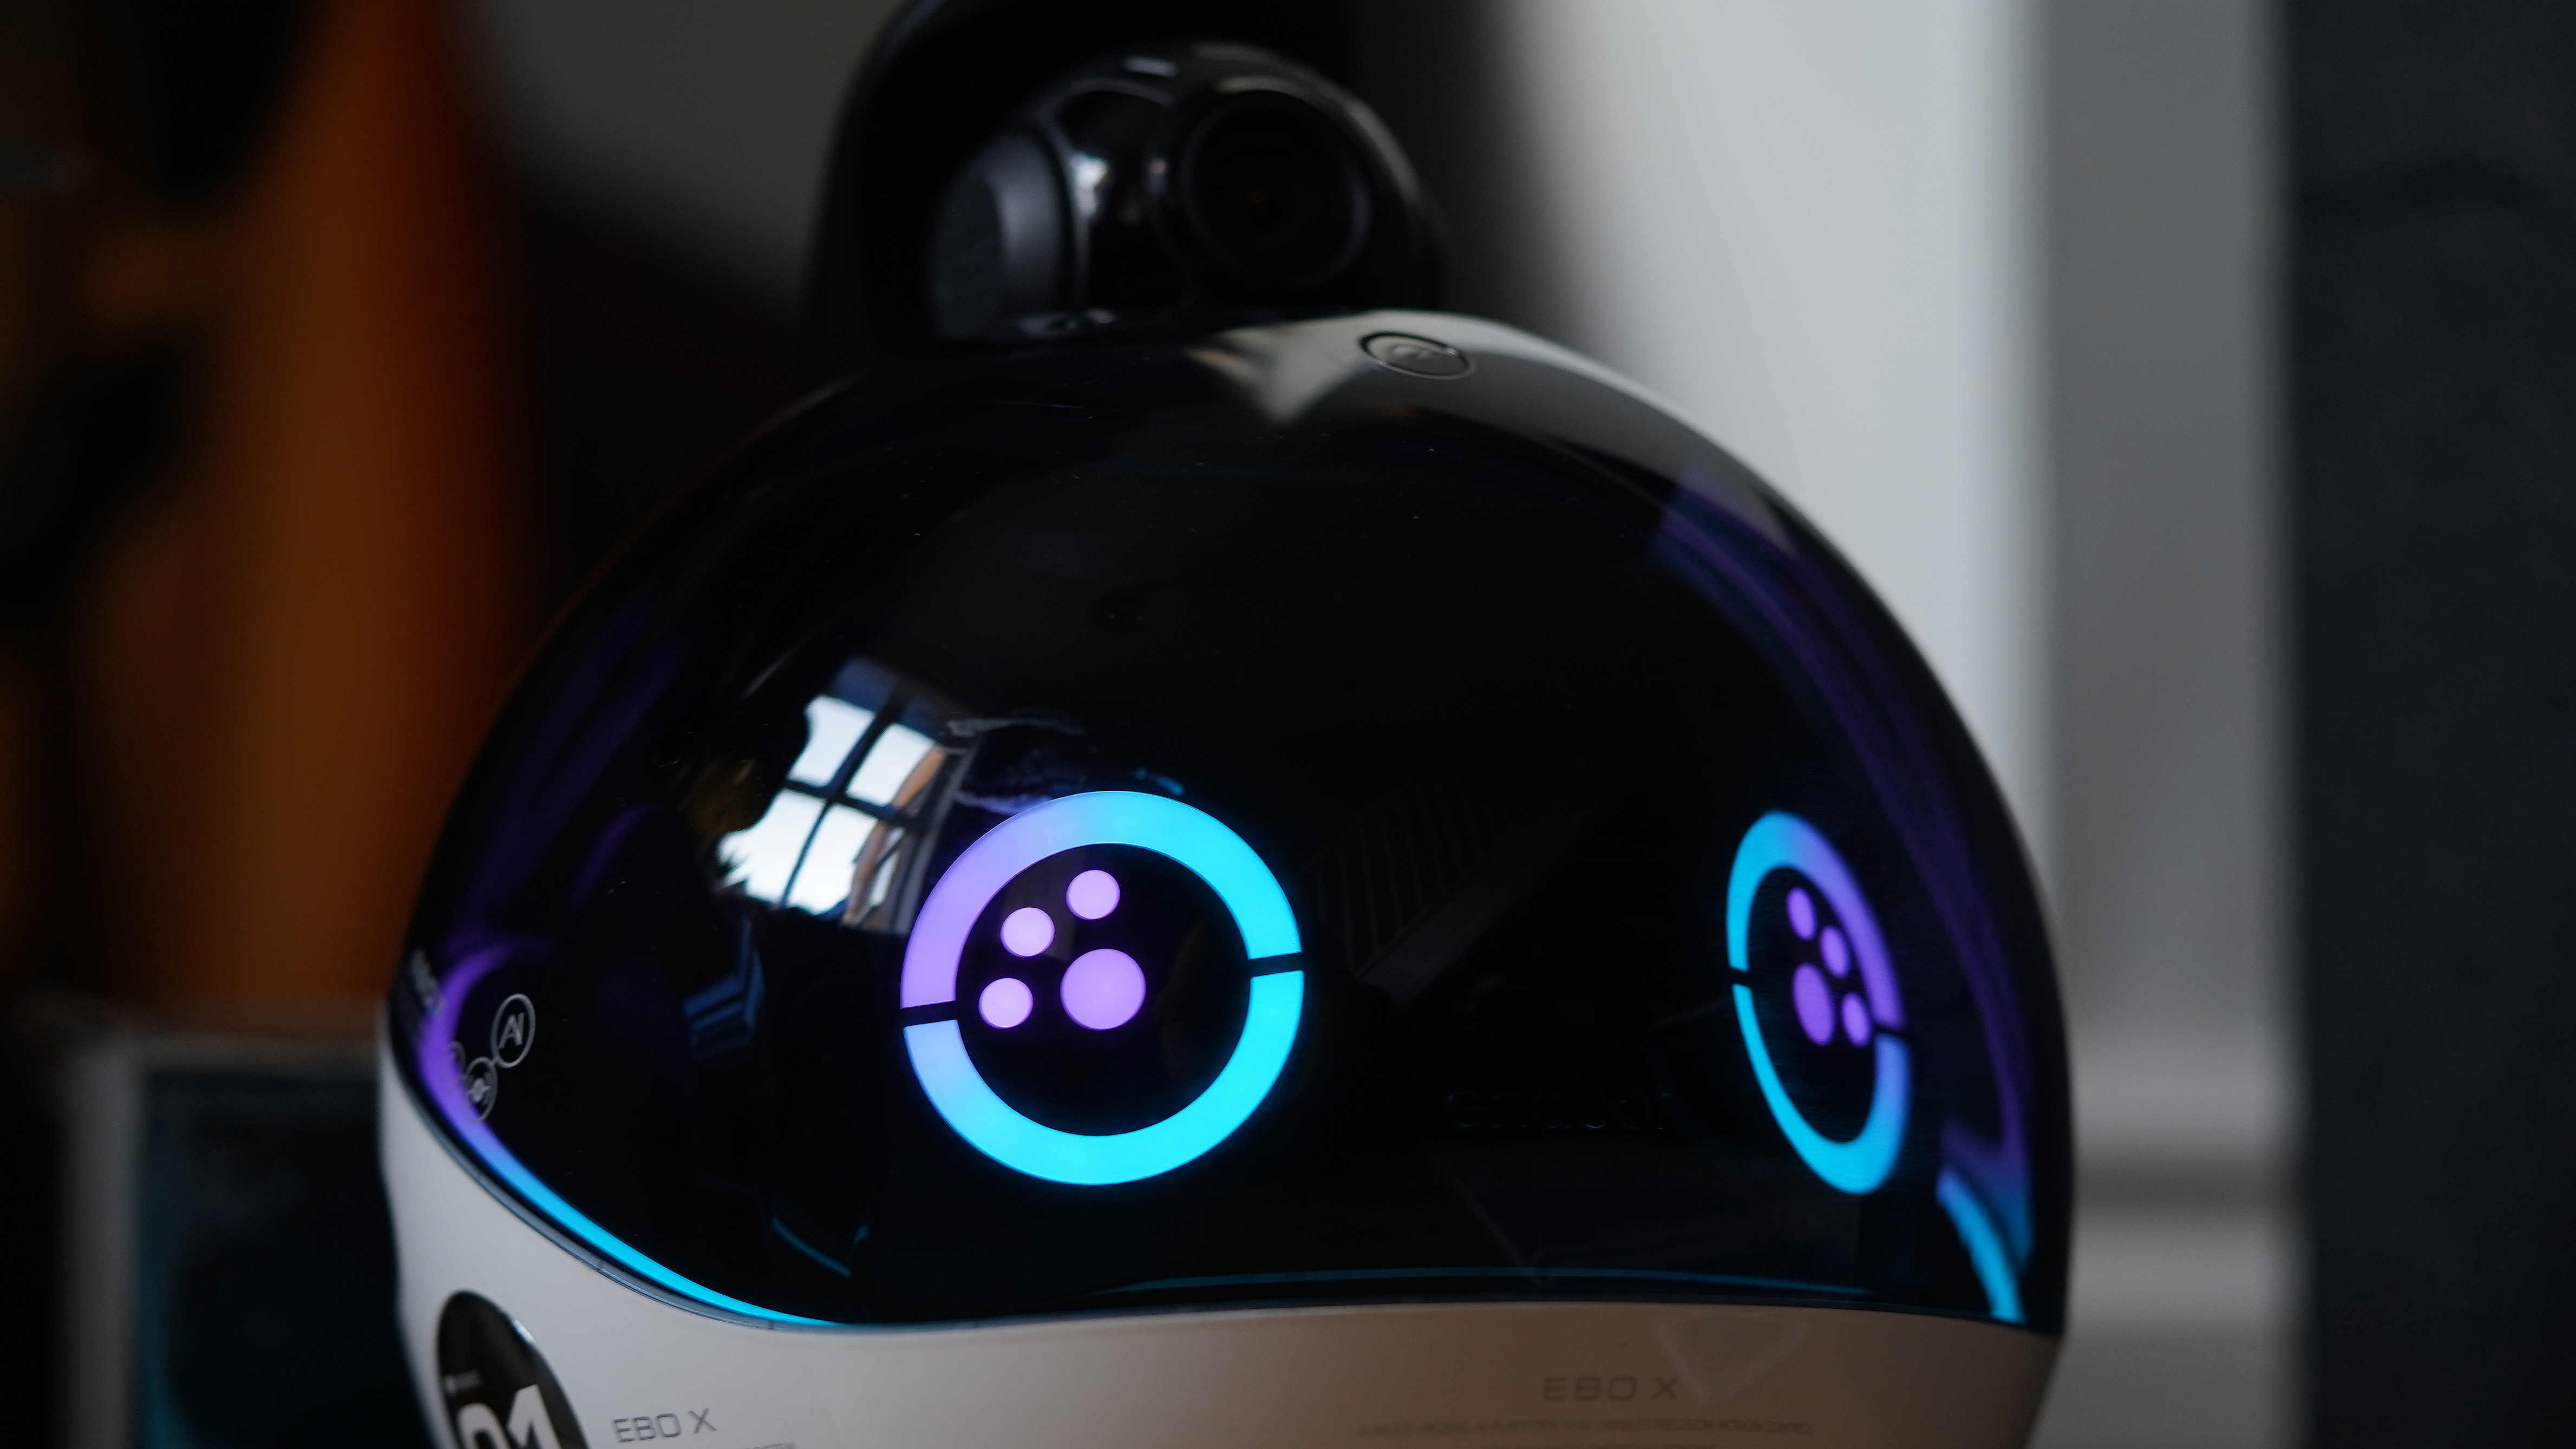 Anki's Vector robot brings us one step closer to 'Star Wars' Droids